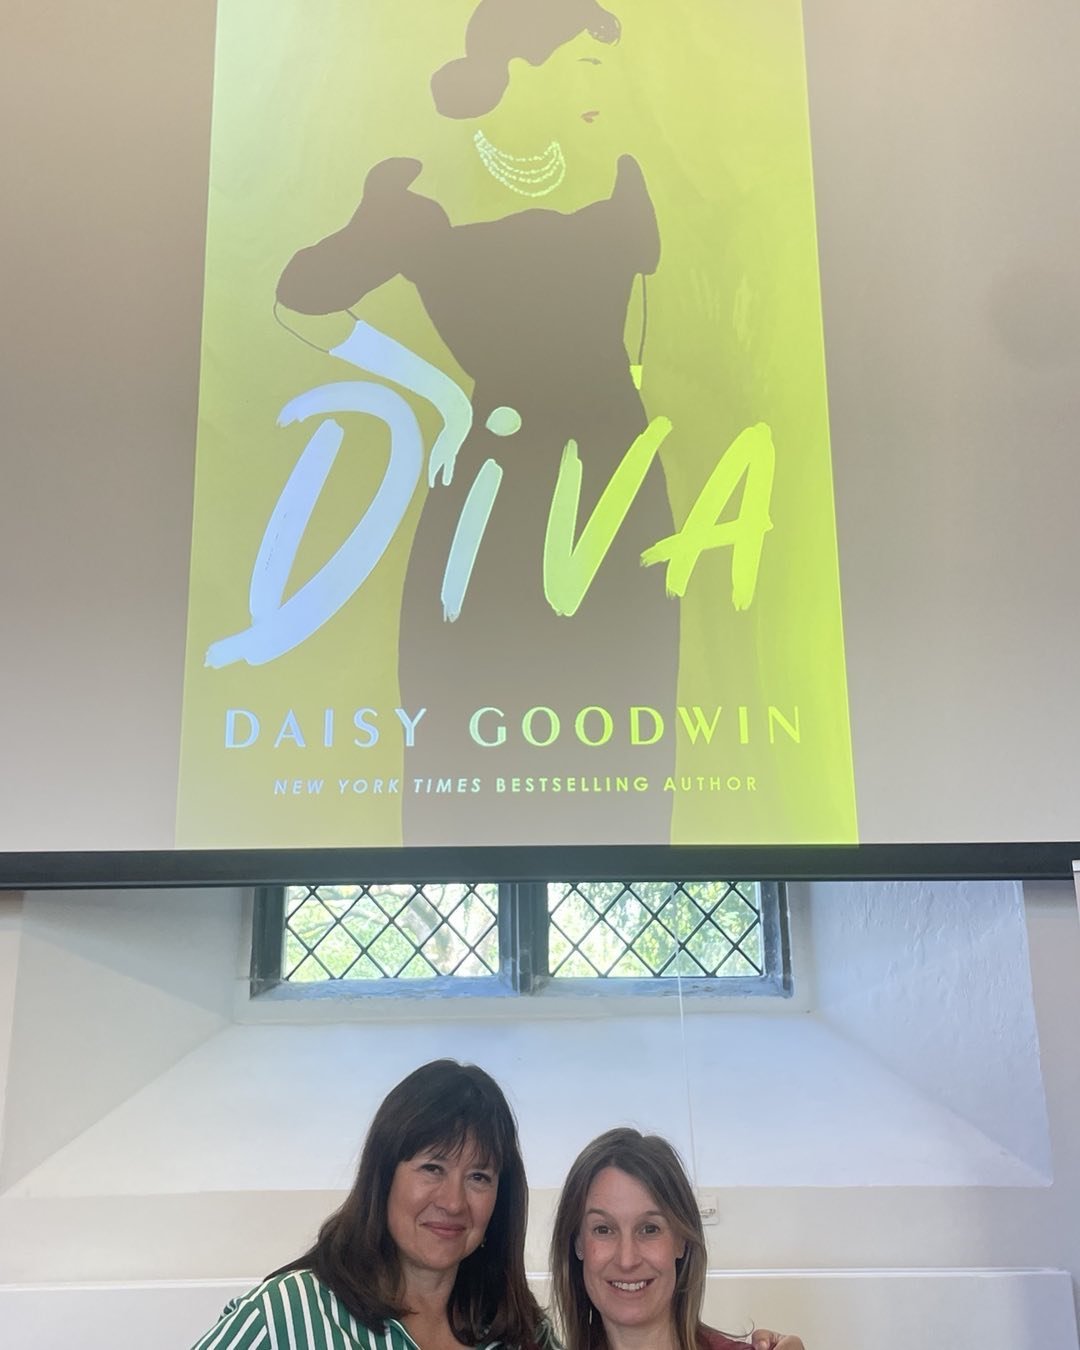 With the lovely @natashapoliszczuk at @winchester_books_festival  ready to #Diva